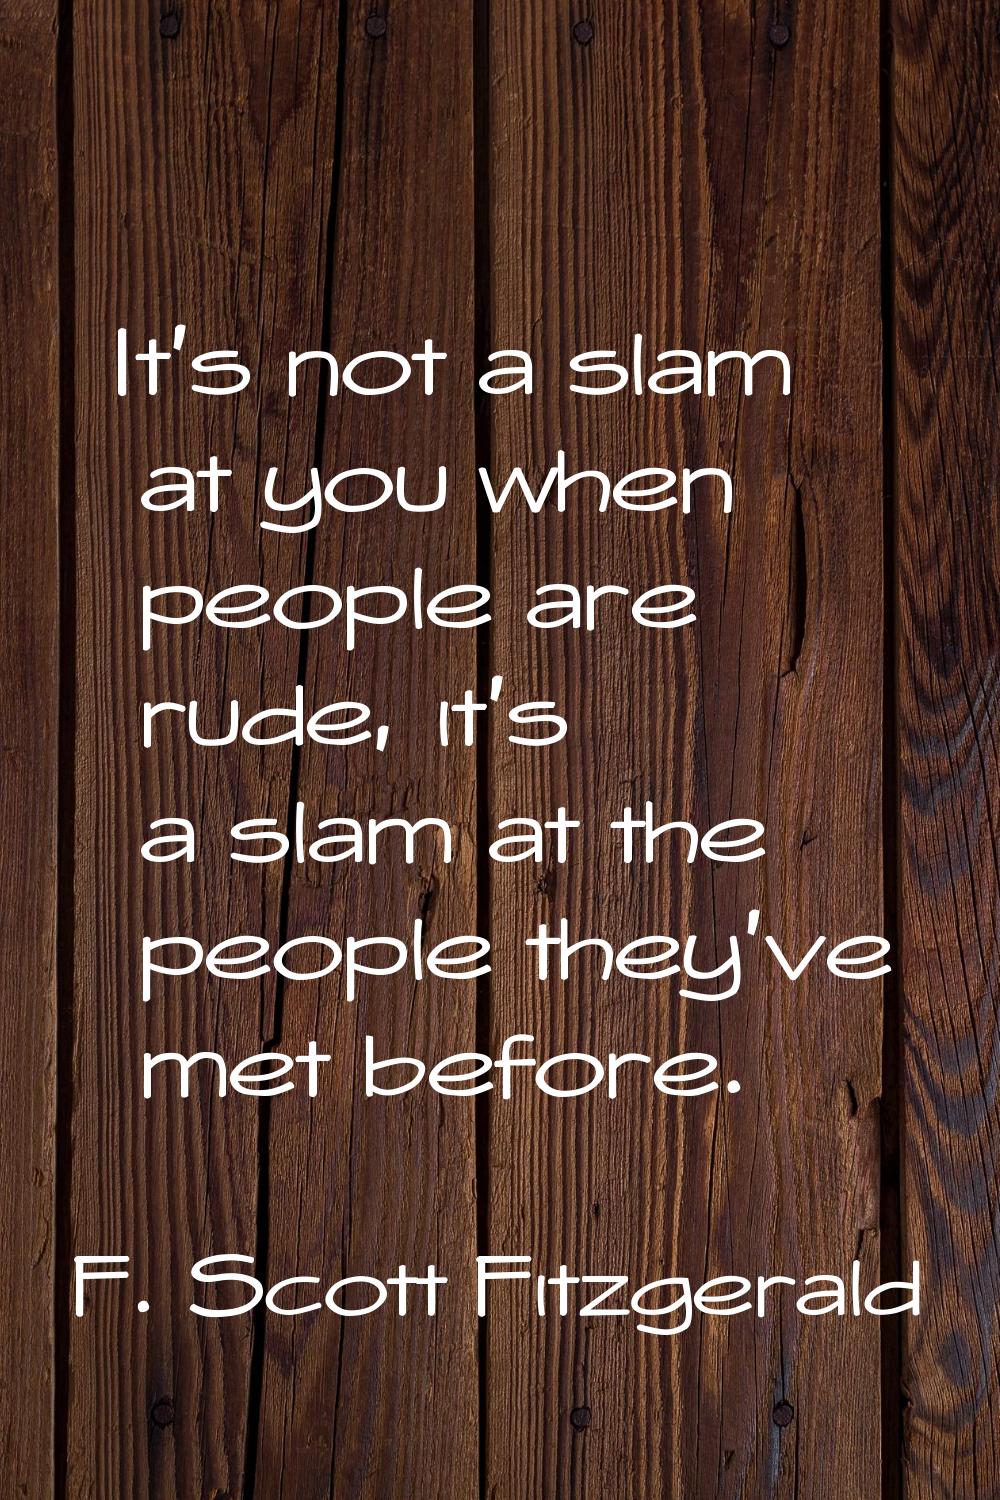 It's not a slam at you when people are rude, it's a slam at the people they've met before.